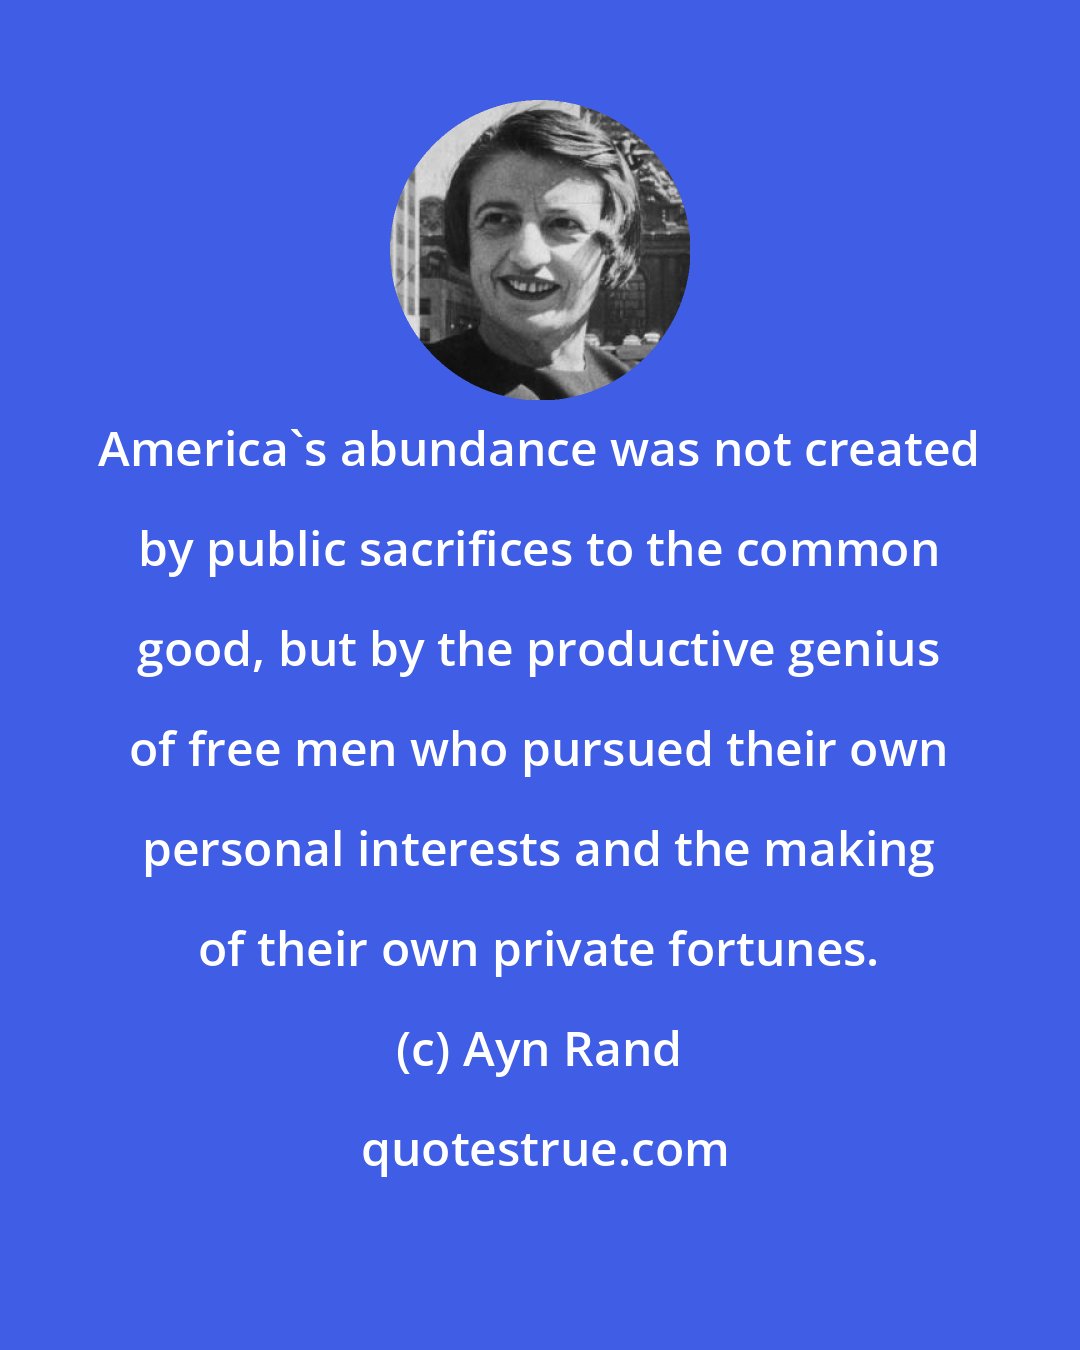 Ayn Rand: America's abundance was not created by public sacrifices to the common good, but by the productive genius of free men who pursued their own personal interests and the making of their own private fortunes.